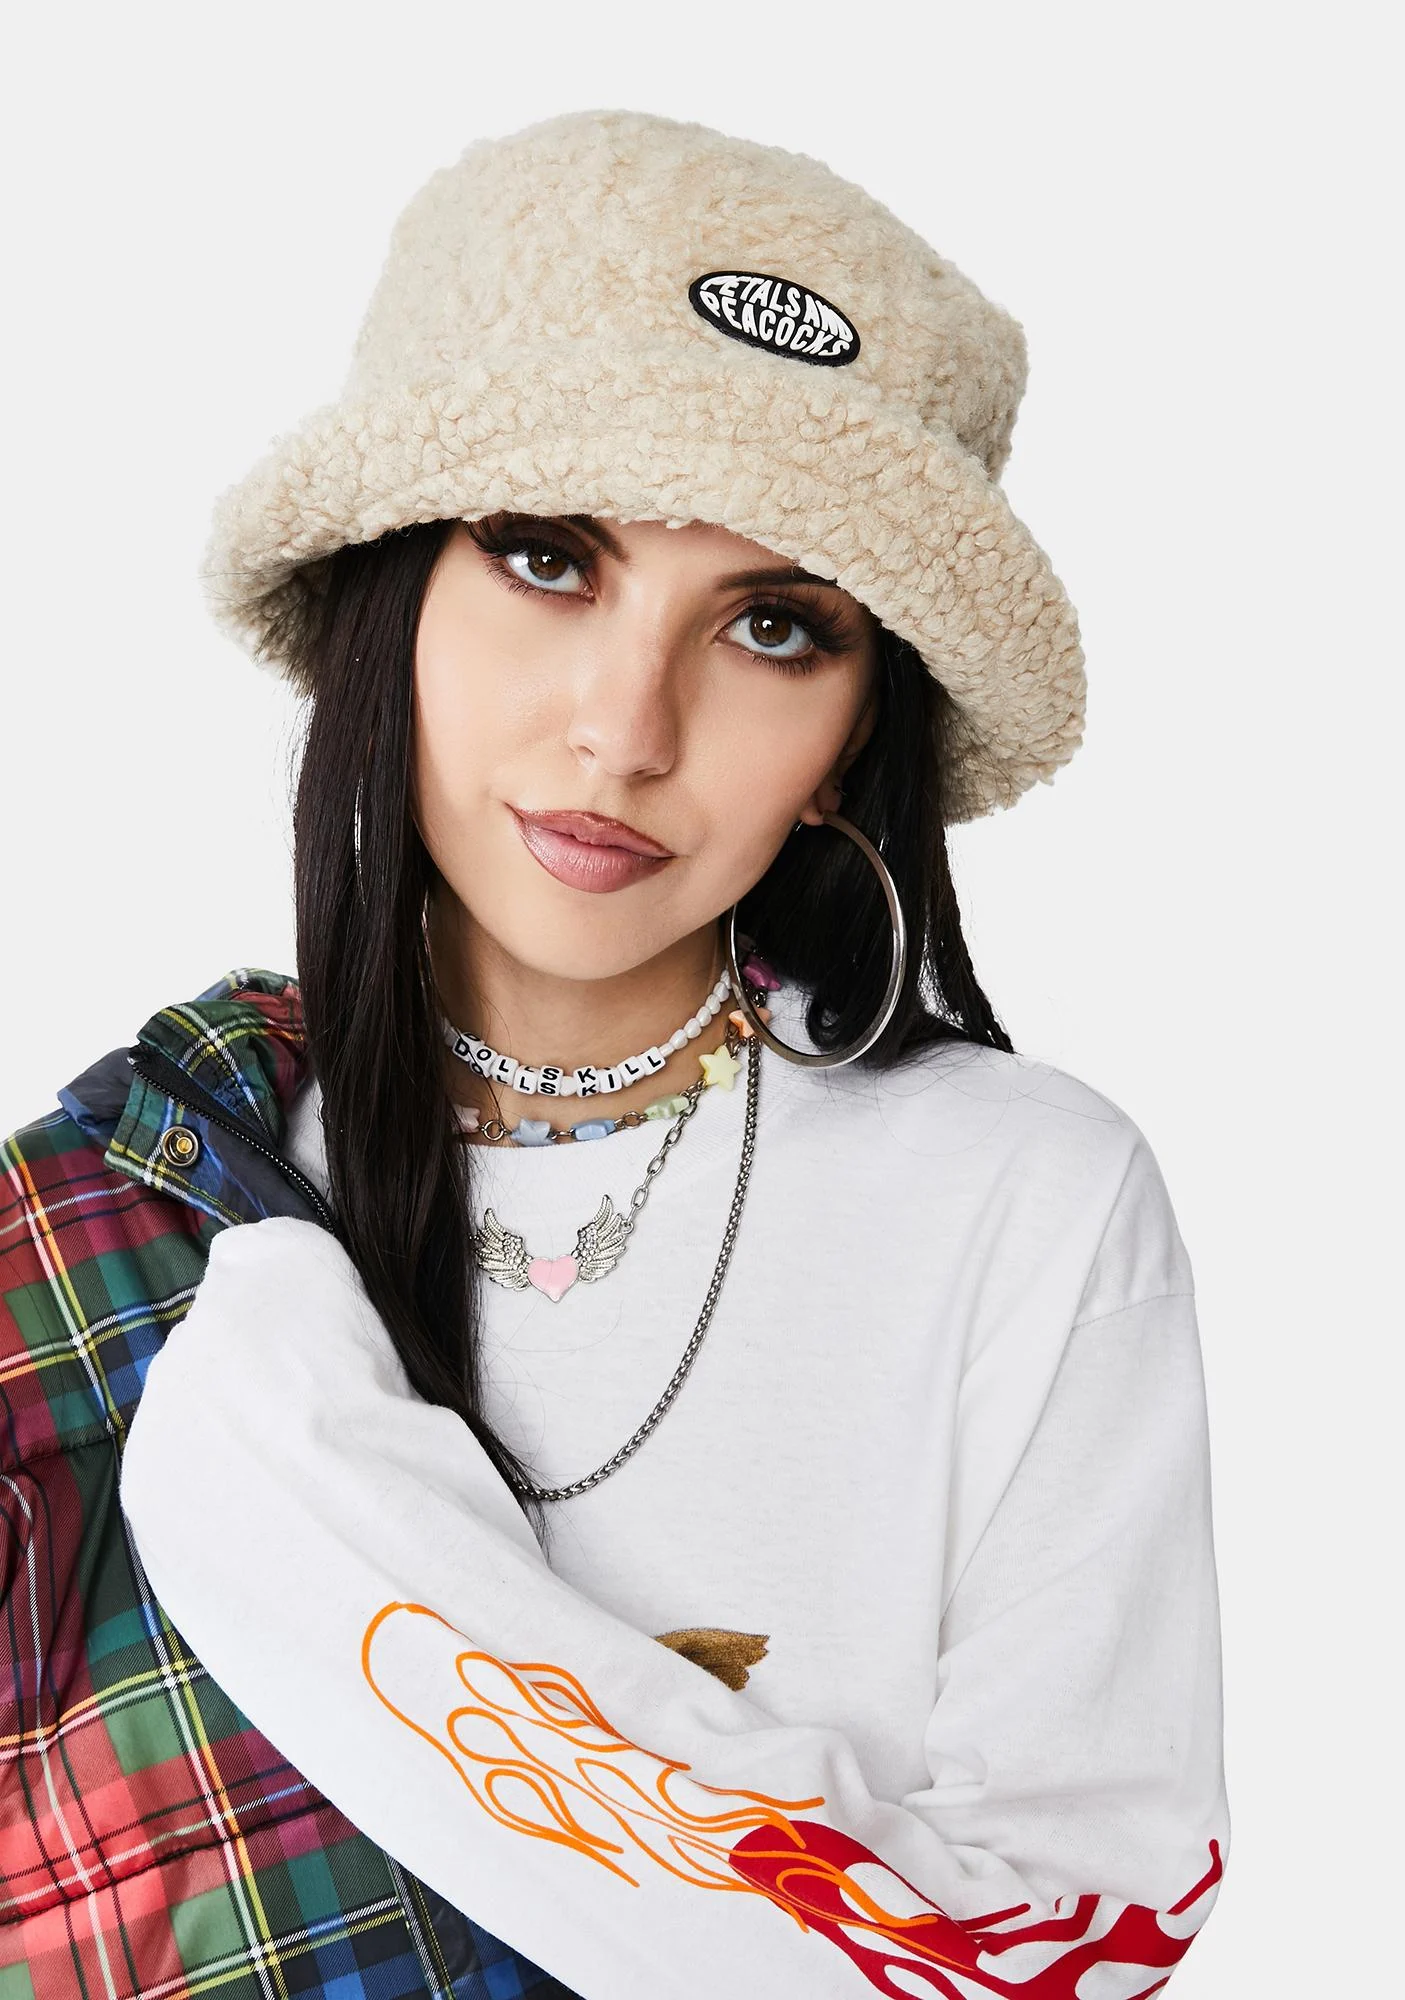 5 Times Celebrities Proved the Bucket Hat Is Back (Again) This